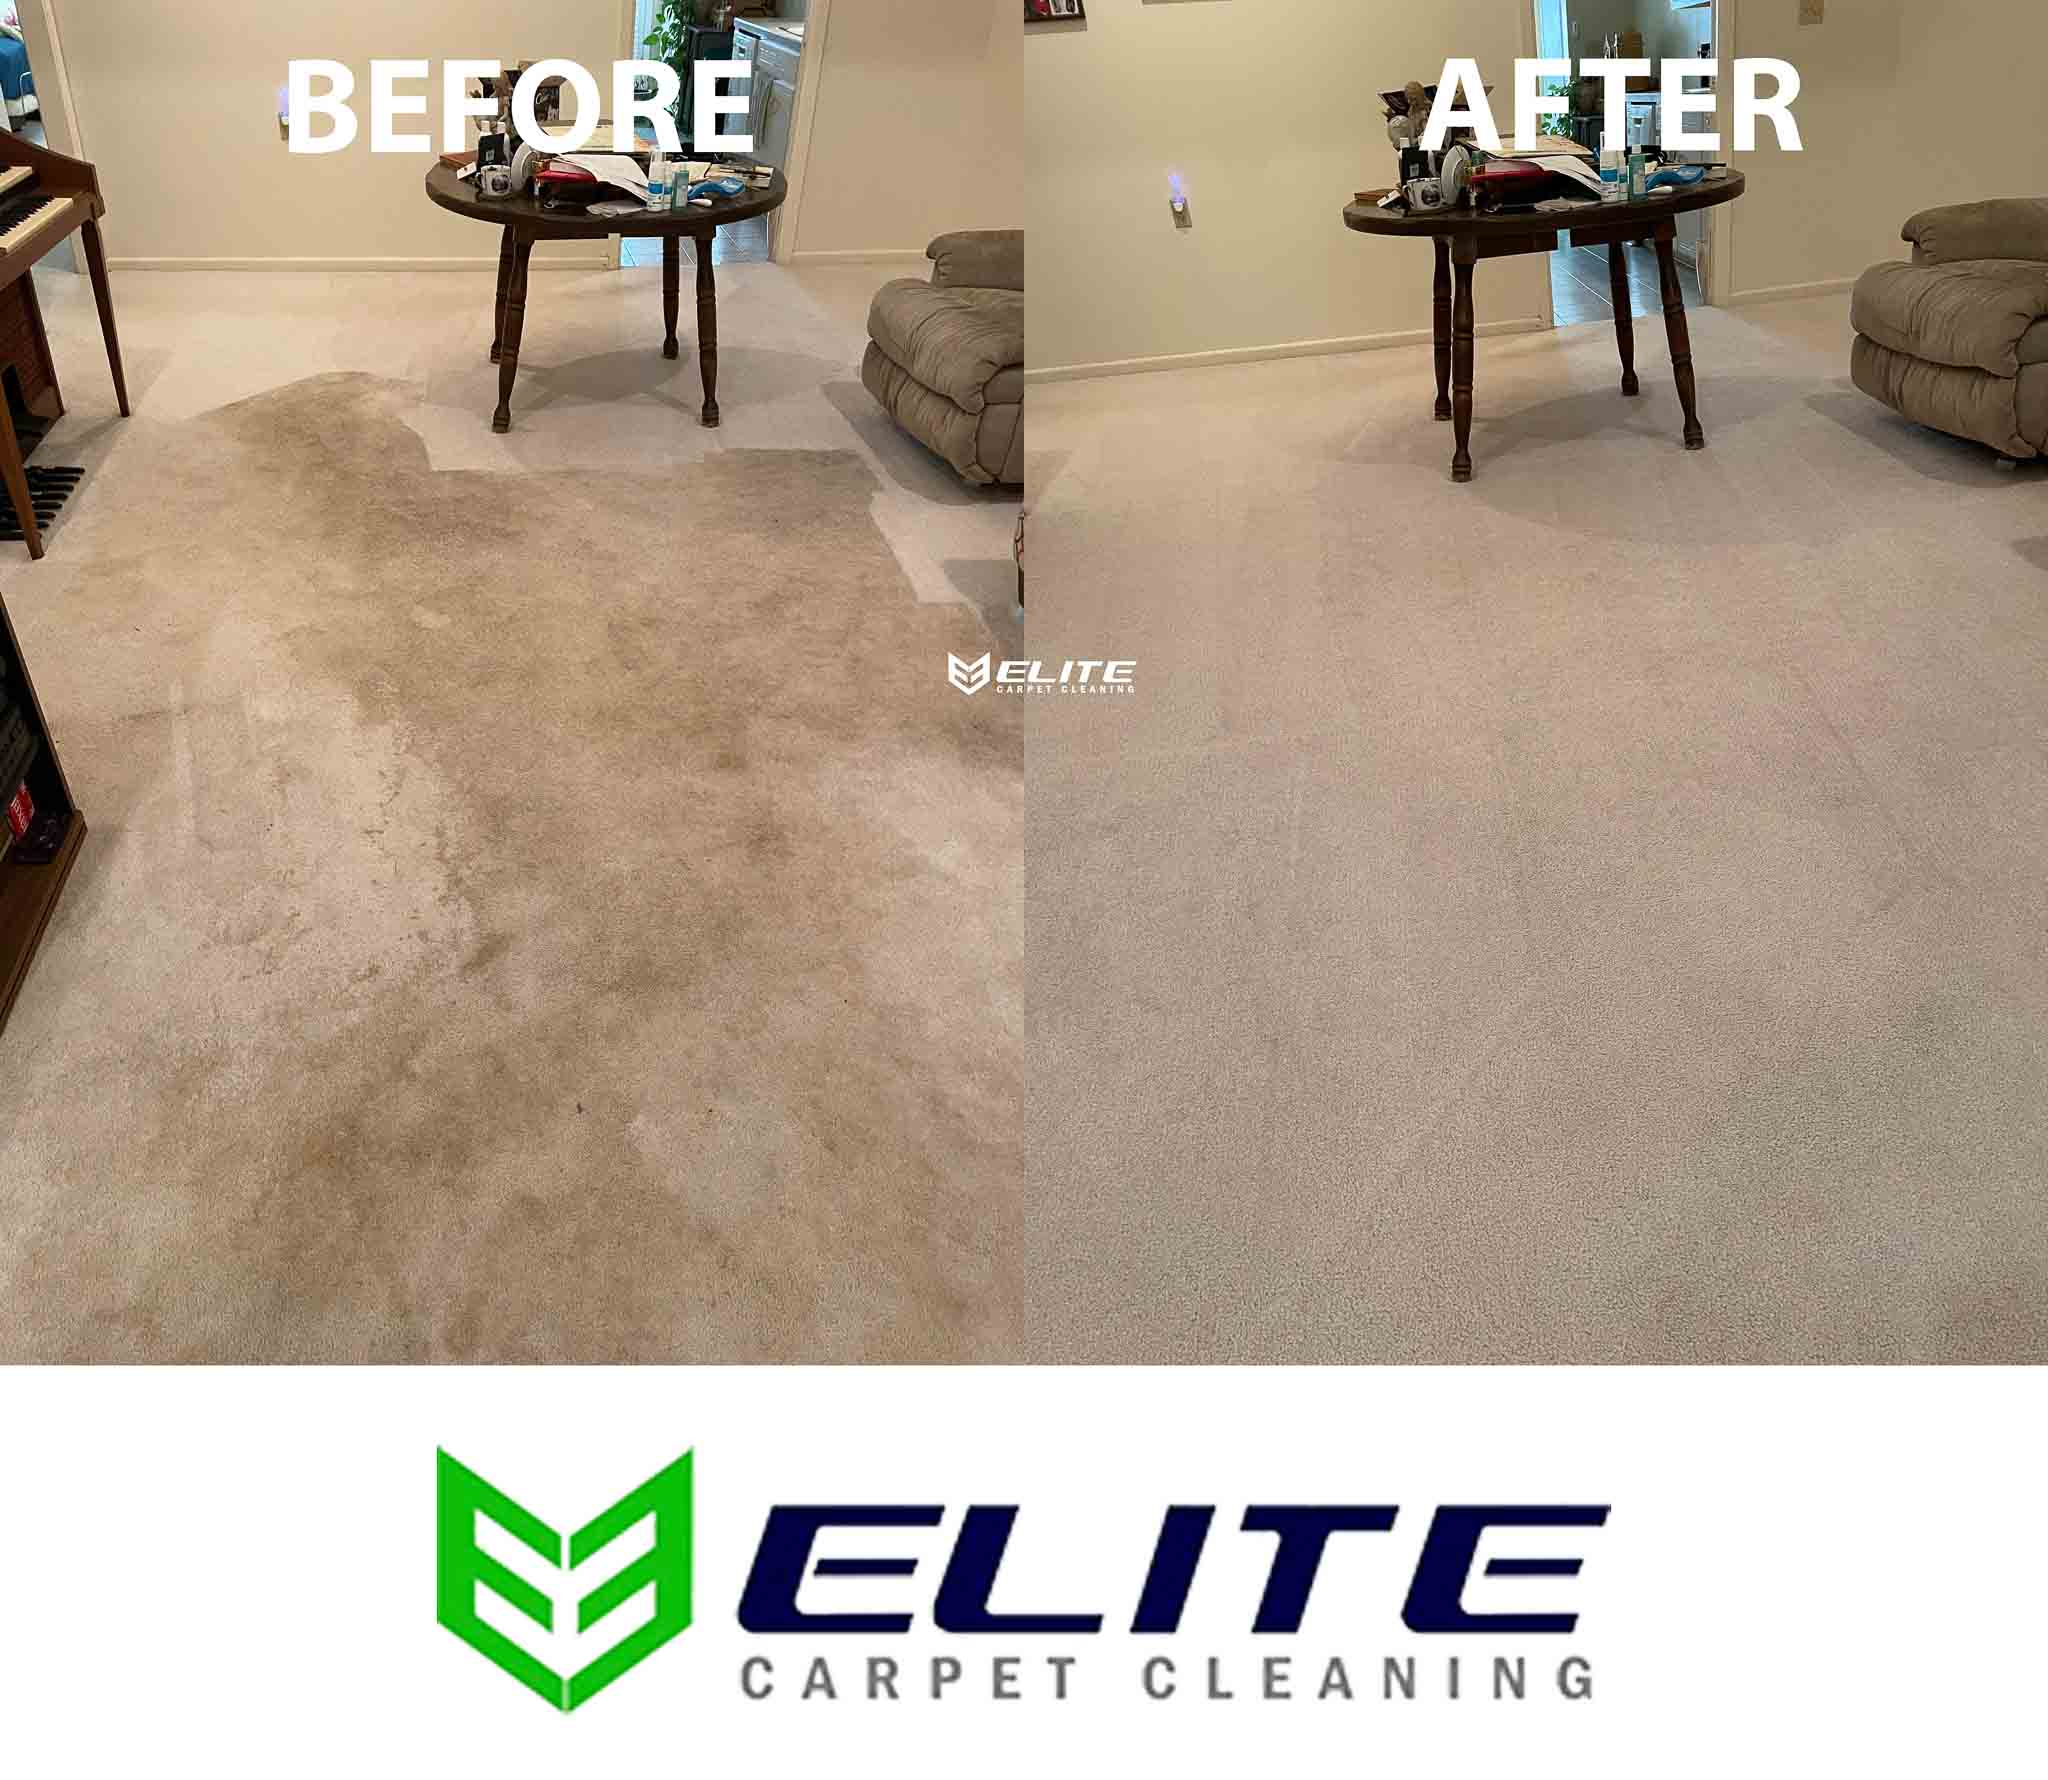 White carpet cleaned before and after in Odessa Tx